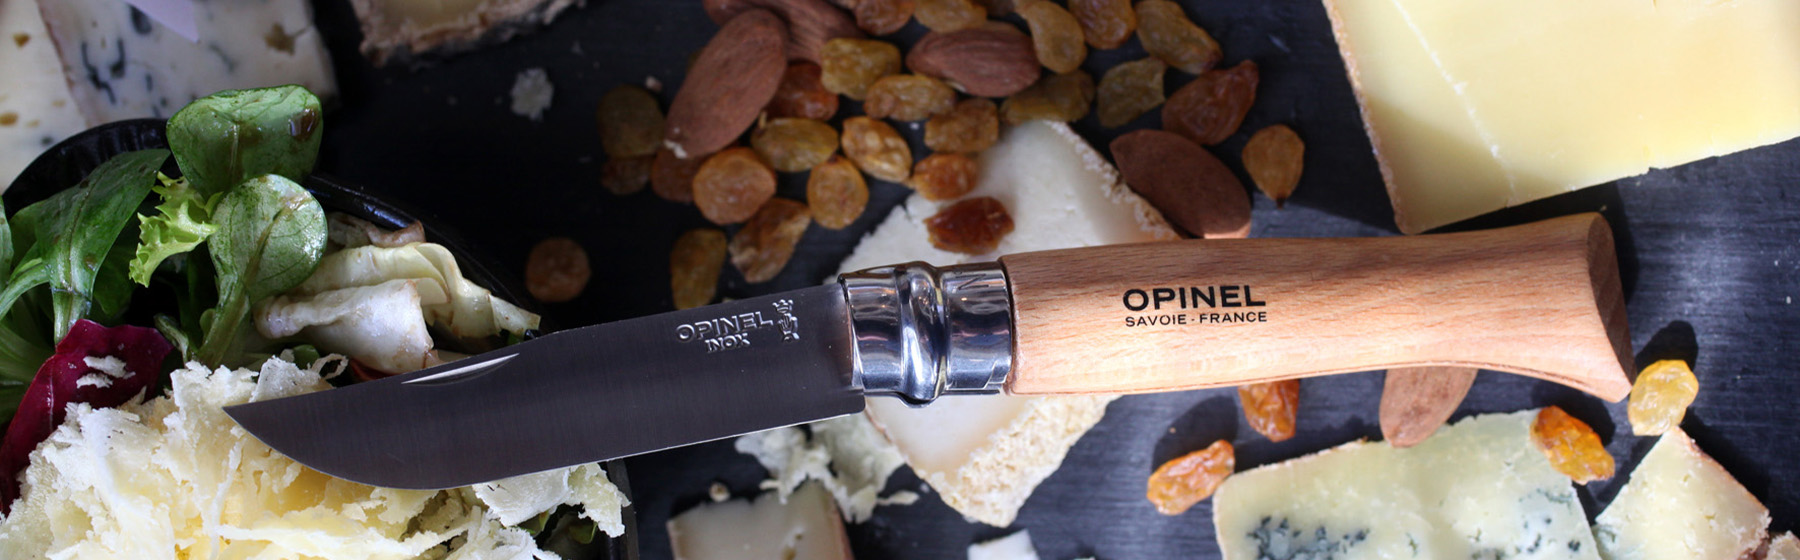 Opinel No. 8 Review